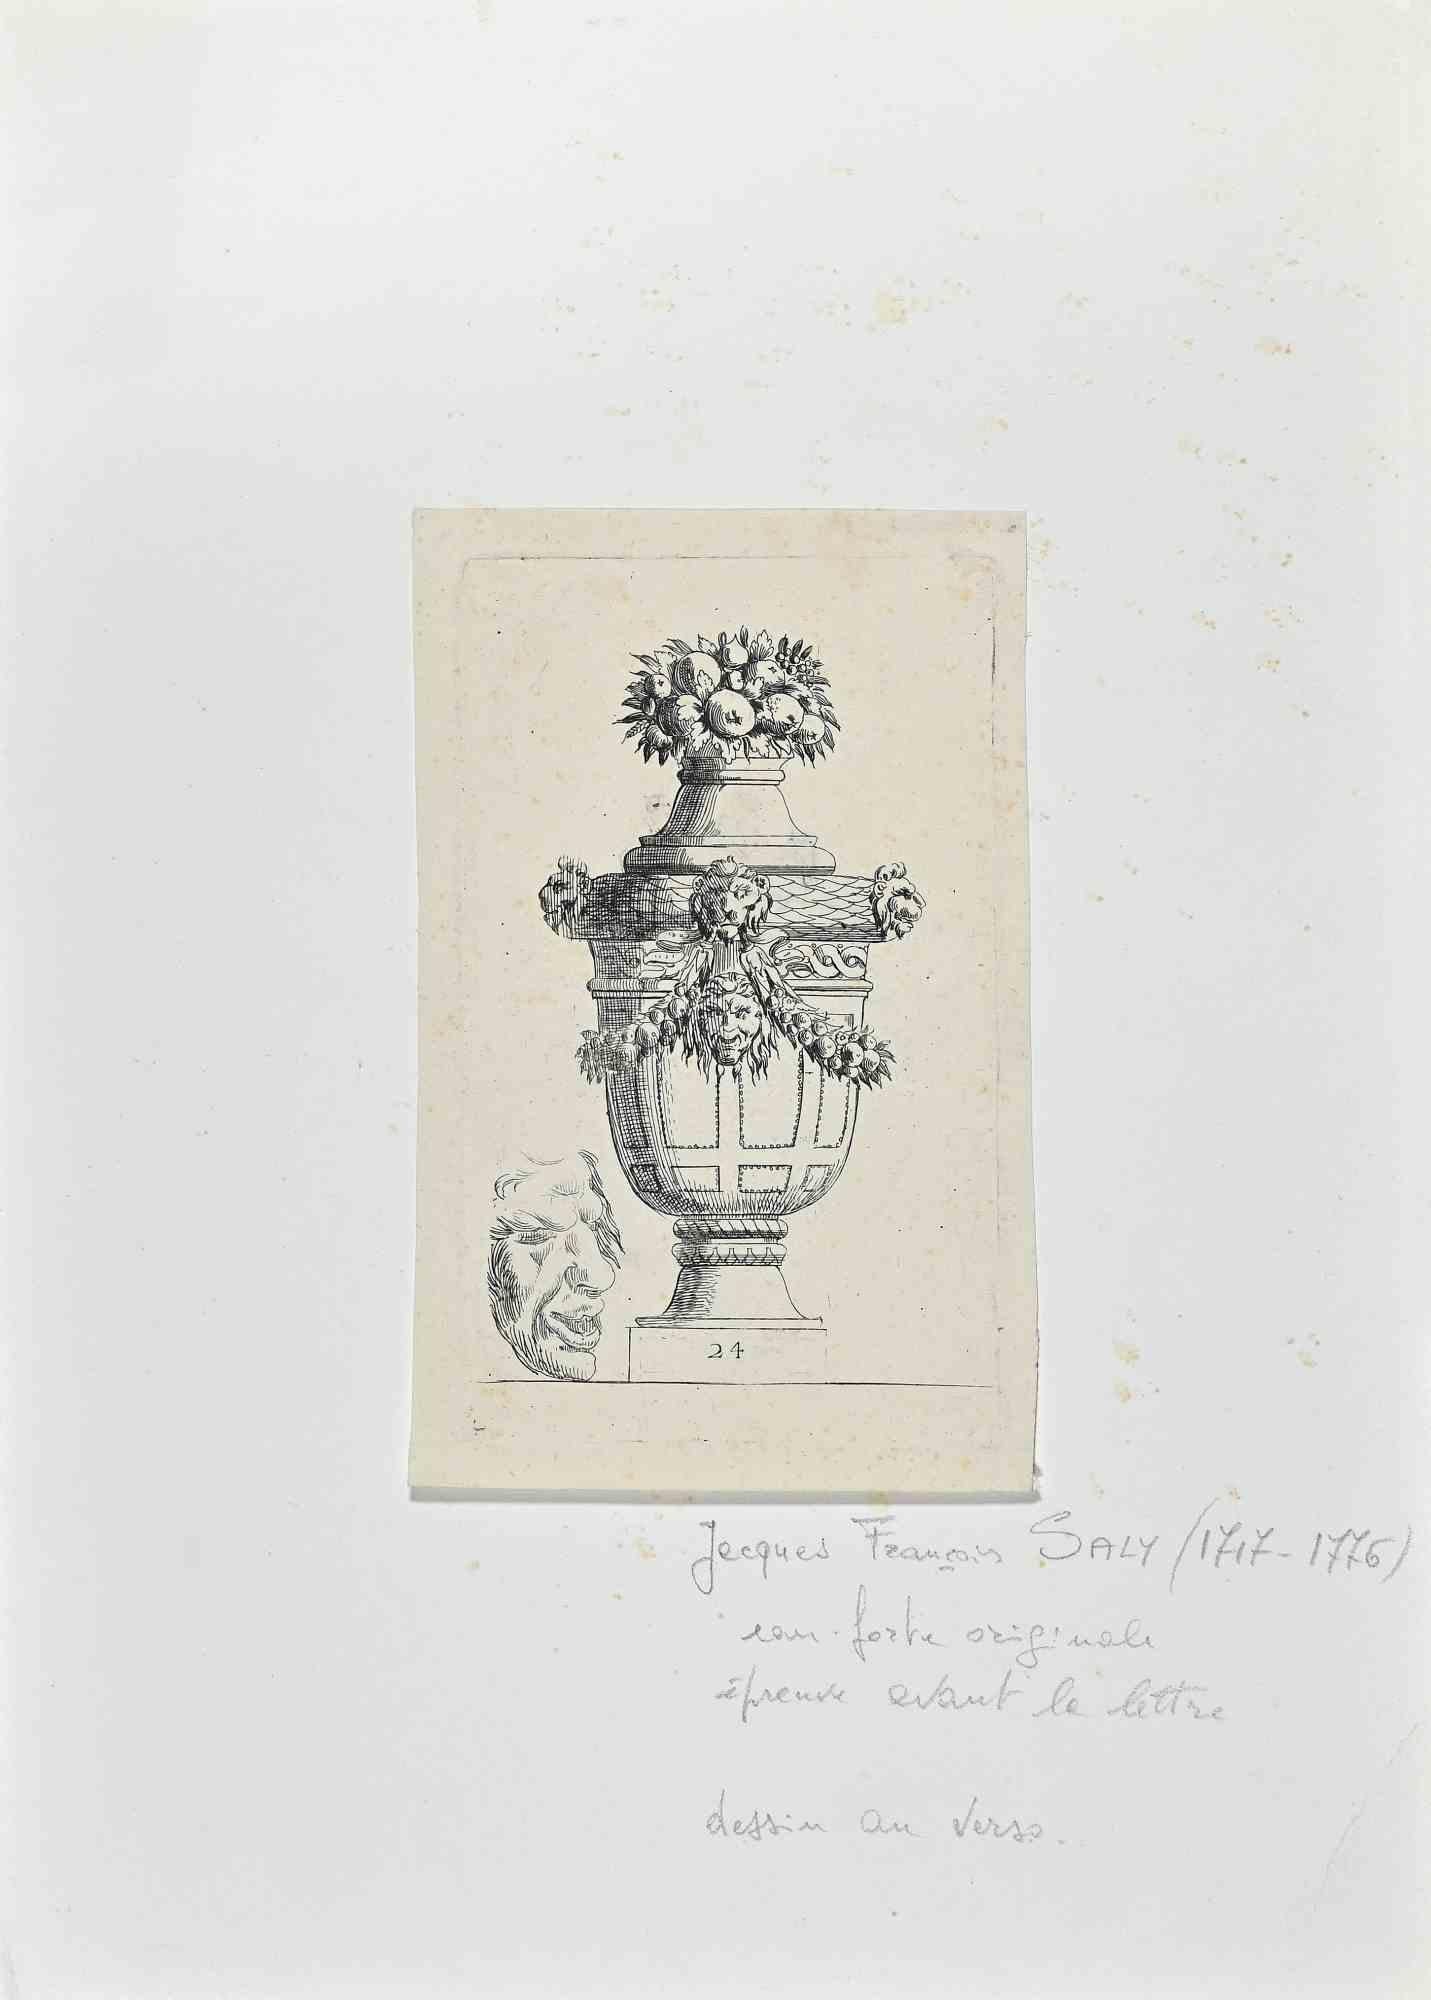 Suite de Vases is an original artwork realized by the French artist  Jacques François Saly (1717-1776)

Etching print. drawing on the back, 1750 c. Passepartout cm 21x22,5

Good conditions except for light foxings especially on the